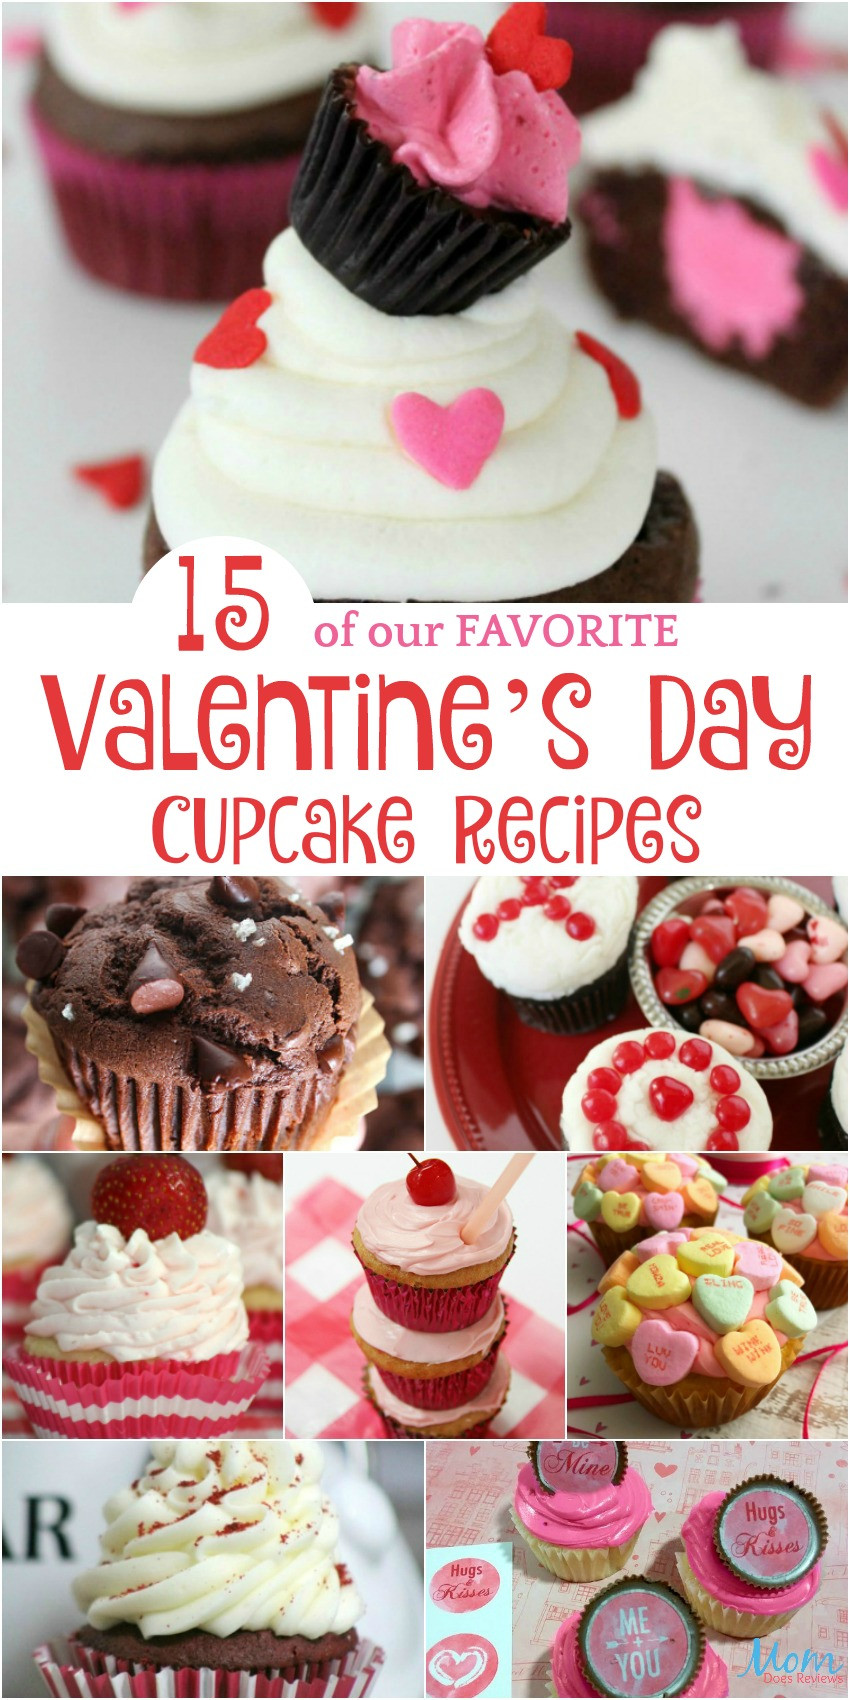 Valentine Day Cupcakes Recipes
 15 of our FAVORITE Valentine s Day Cupcake Recipes